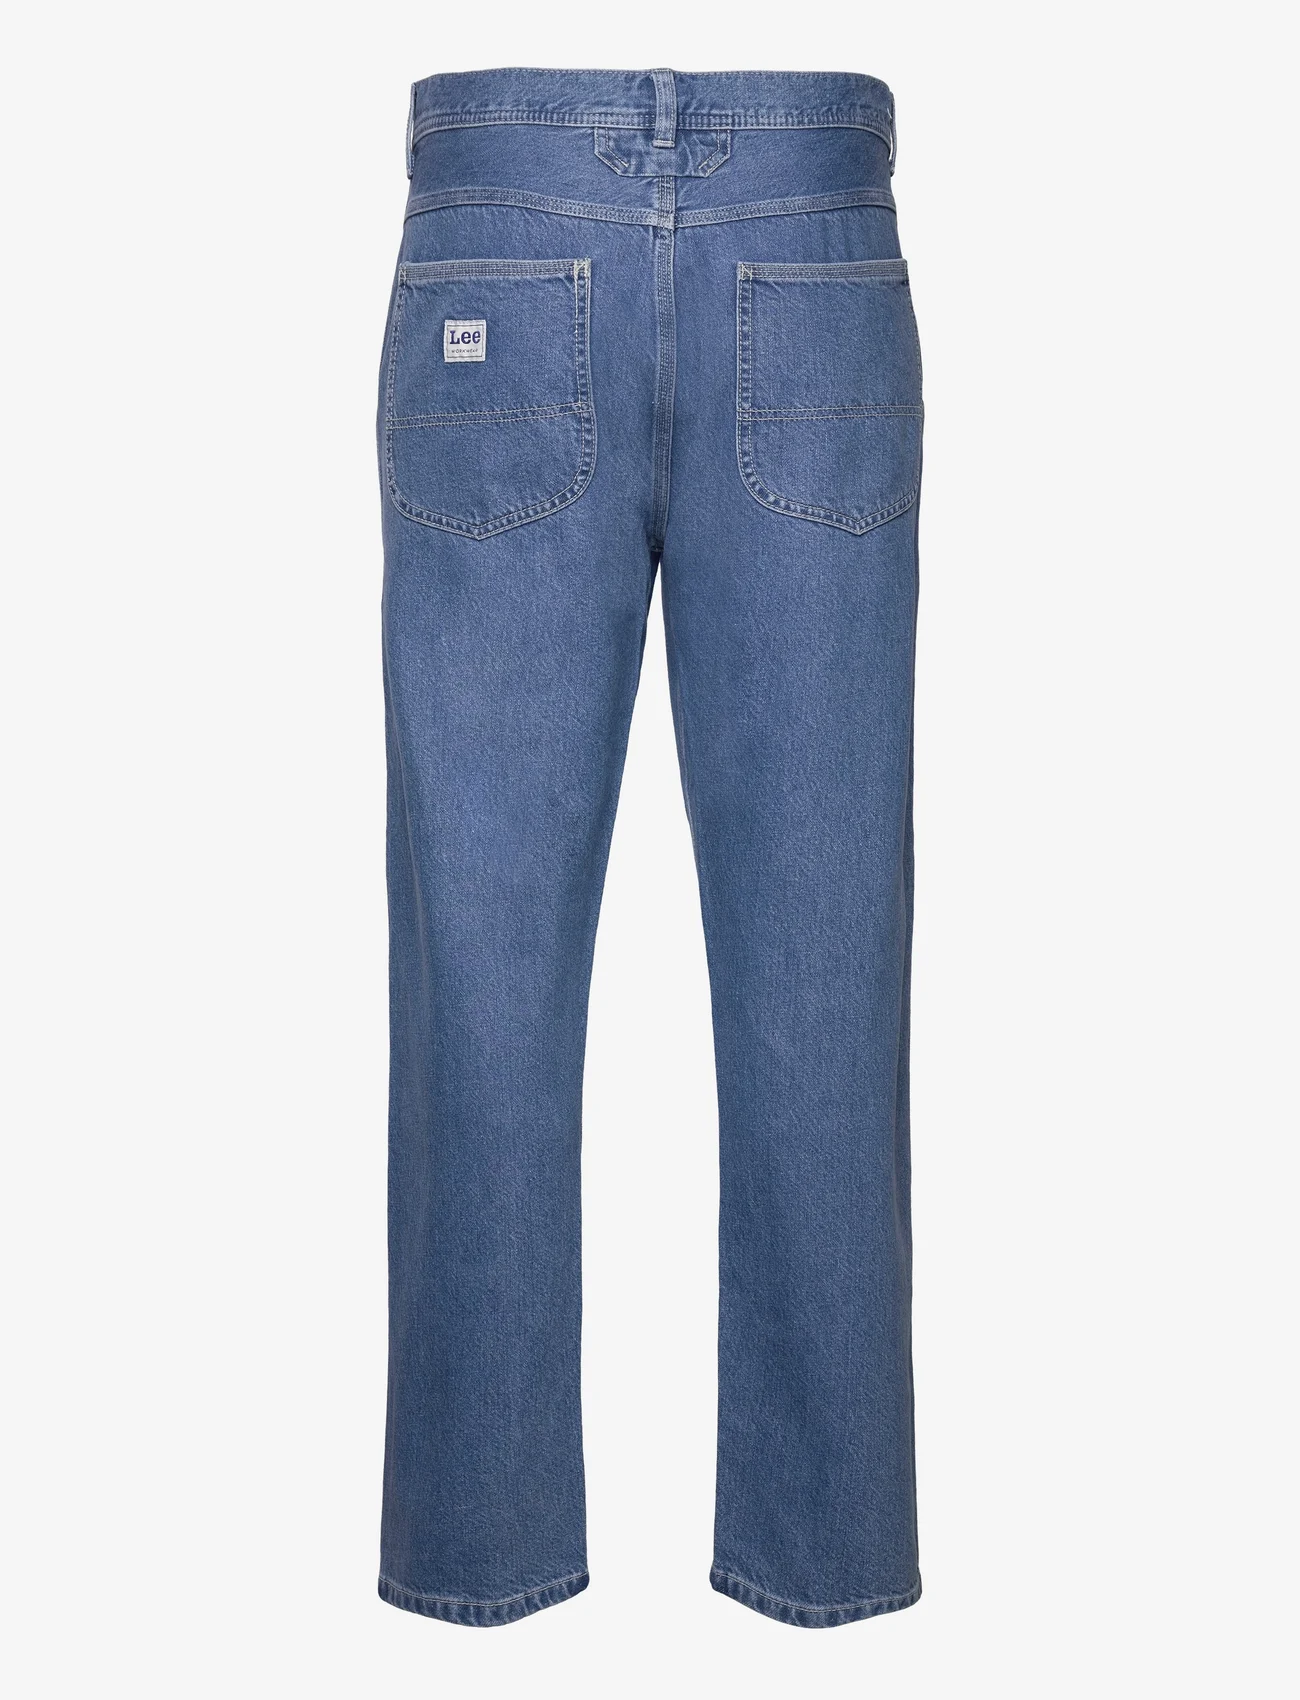 Lee Jeans - 90S PANT - relaxed jeans - blue lines mid - 1